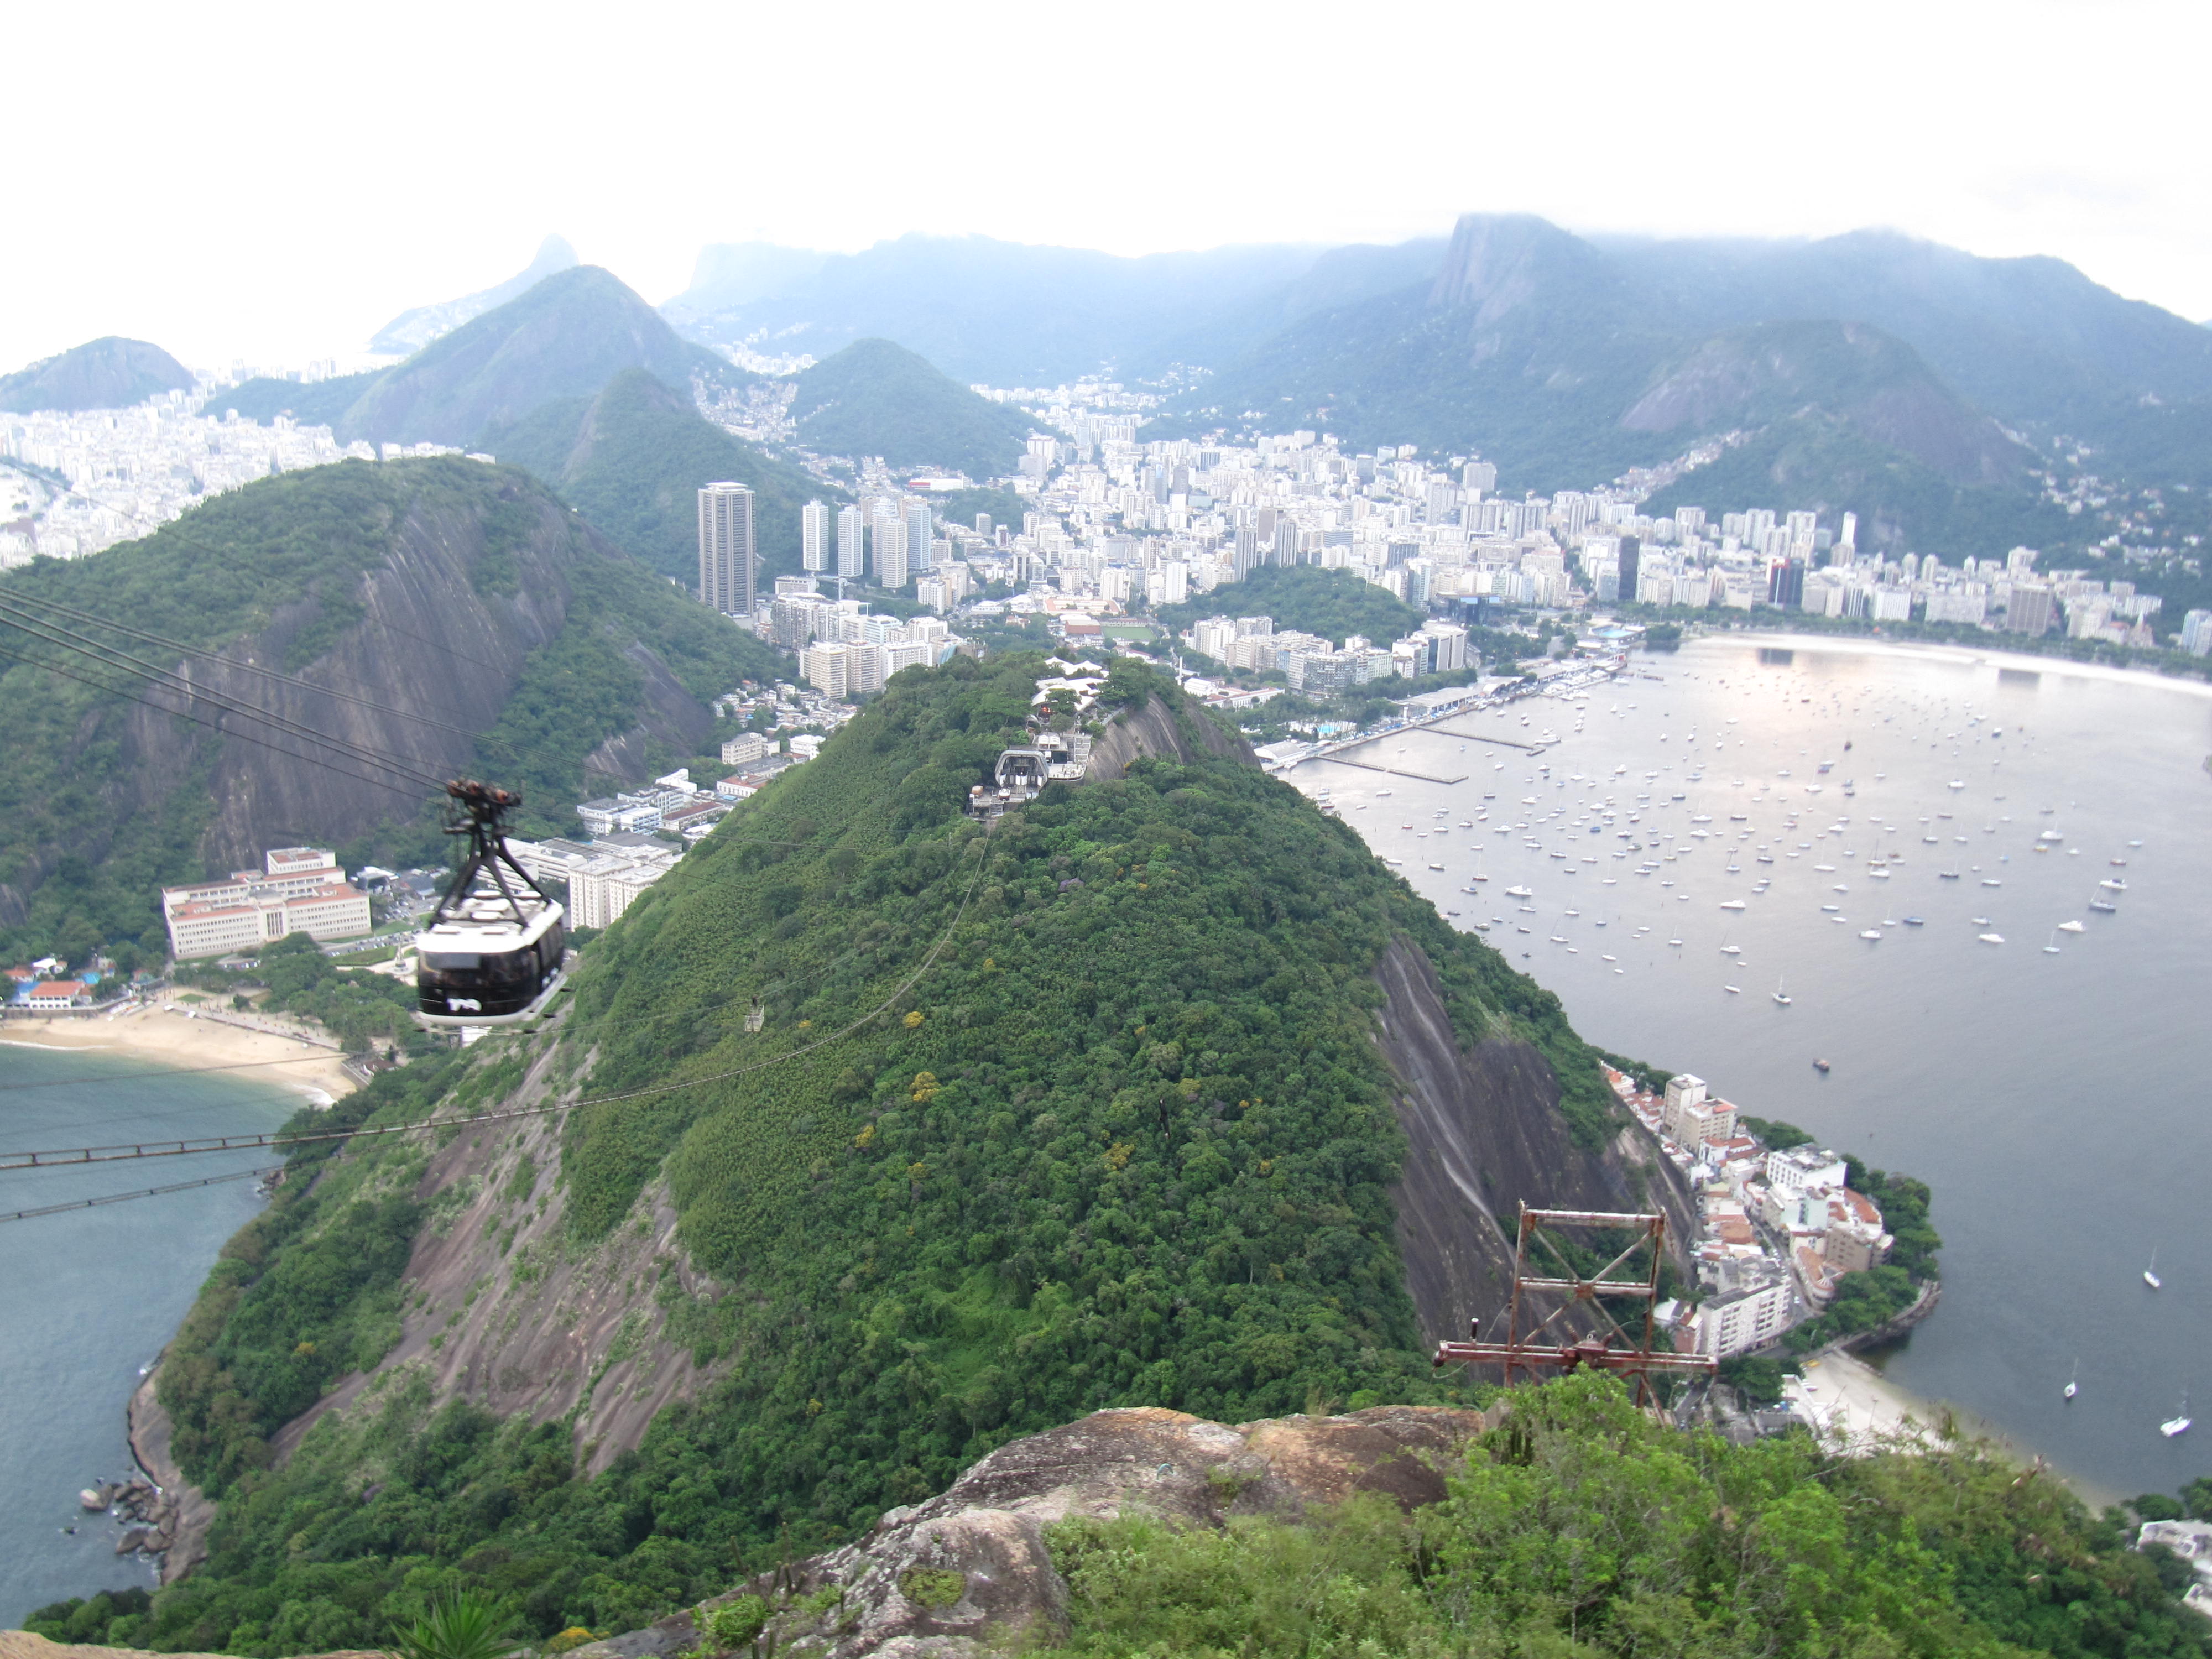 Aerial view of Rio de Janeiro from Sugarloaf Mountain, with the iconic cable car ascending the peak, overlooking the densely populated cityscape, the sprawling Botafogo Bay filled with boats, and the distant Corcovado Mountain